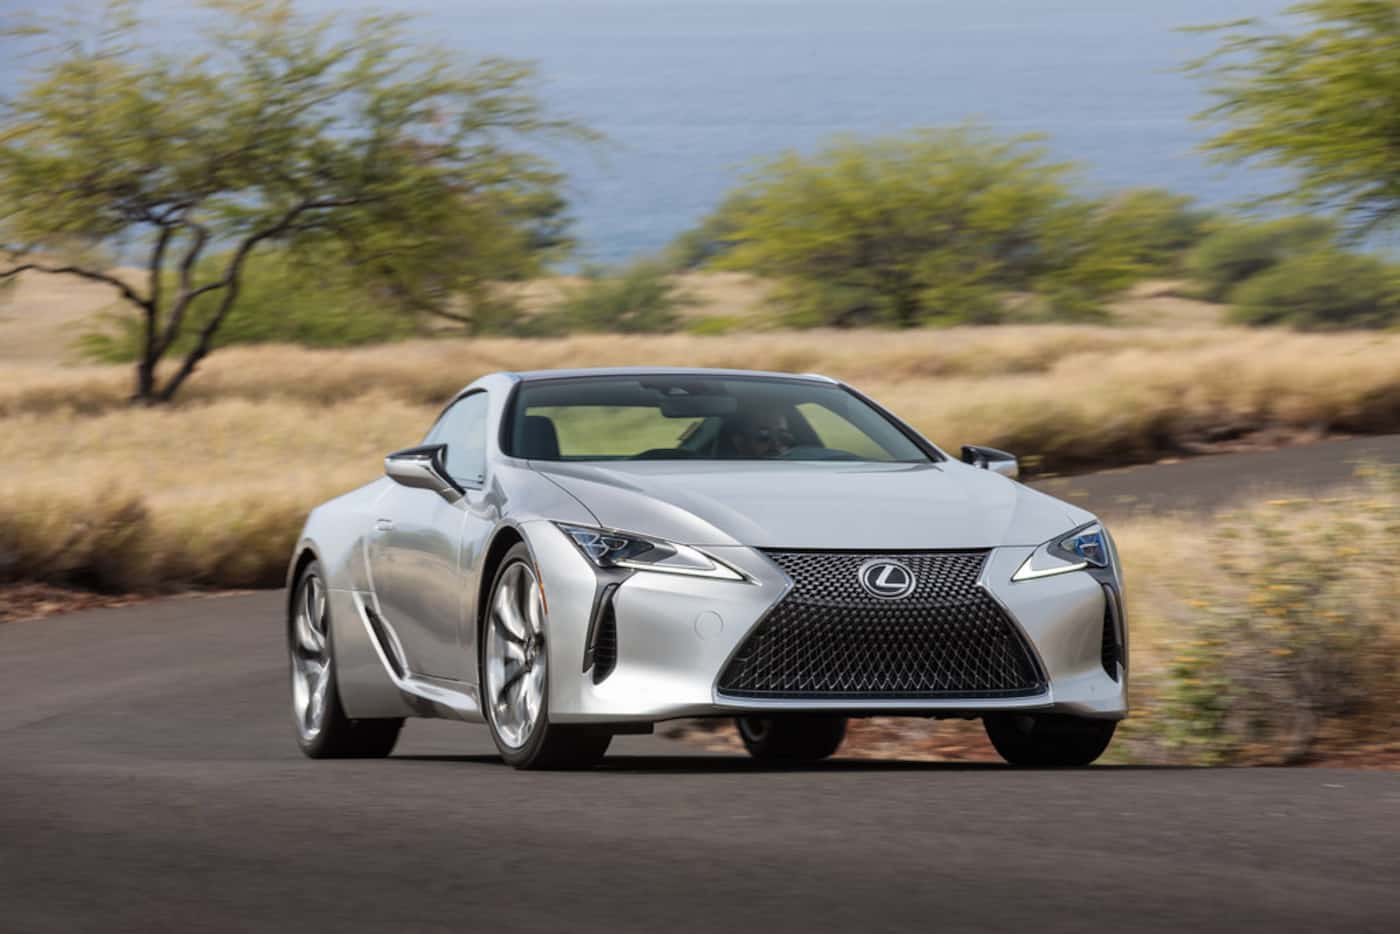 The 2018 Lexus LC 500 coupe starts at $92,000.